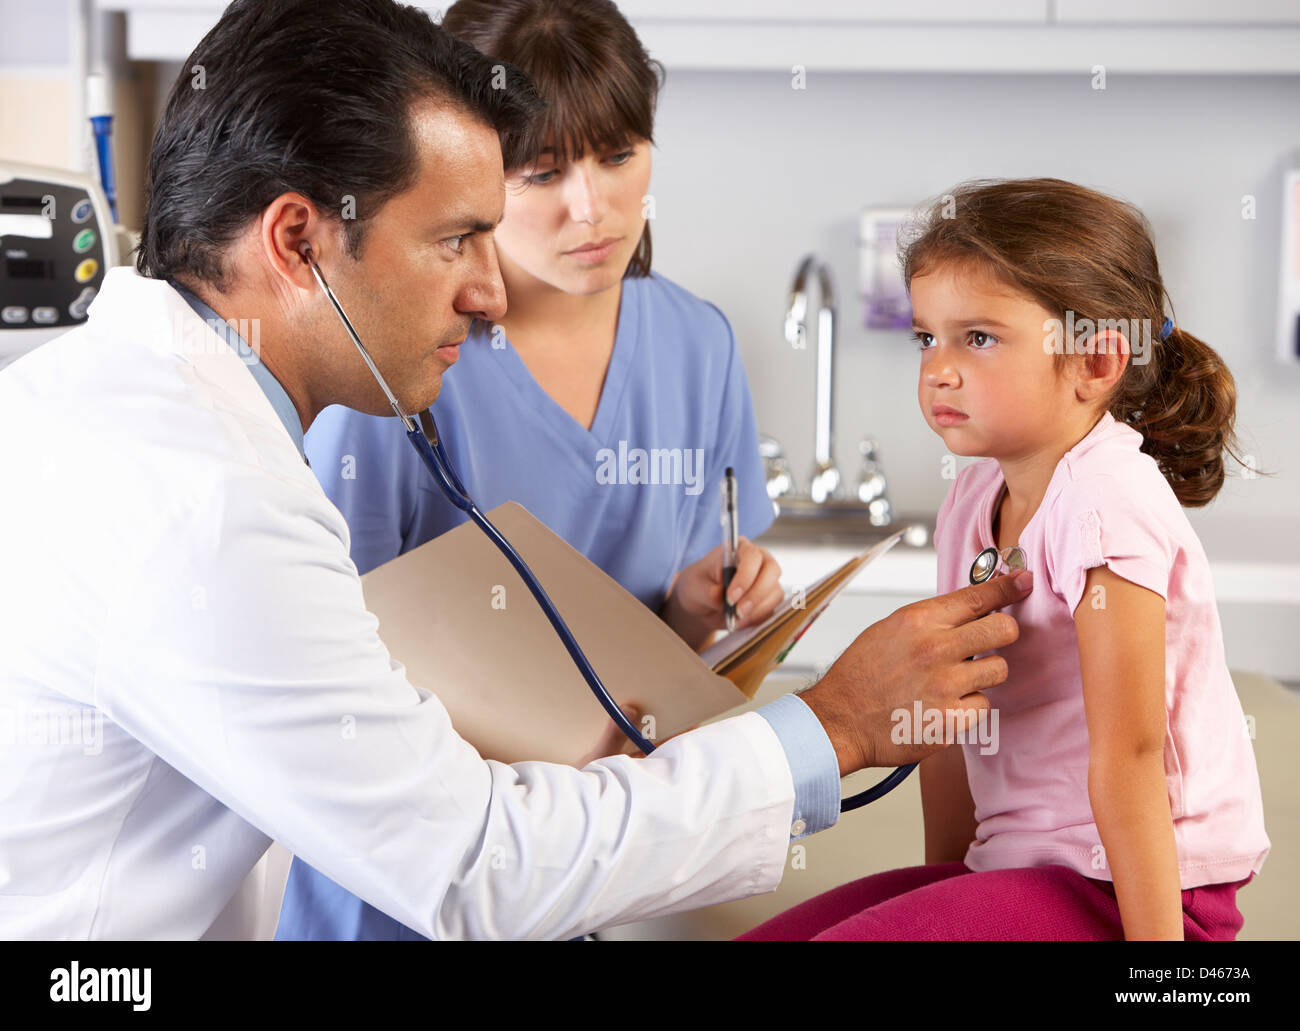 Child Patient Visiting Doctor's Office Stock Photo